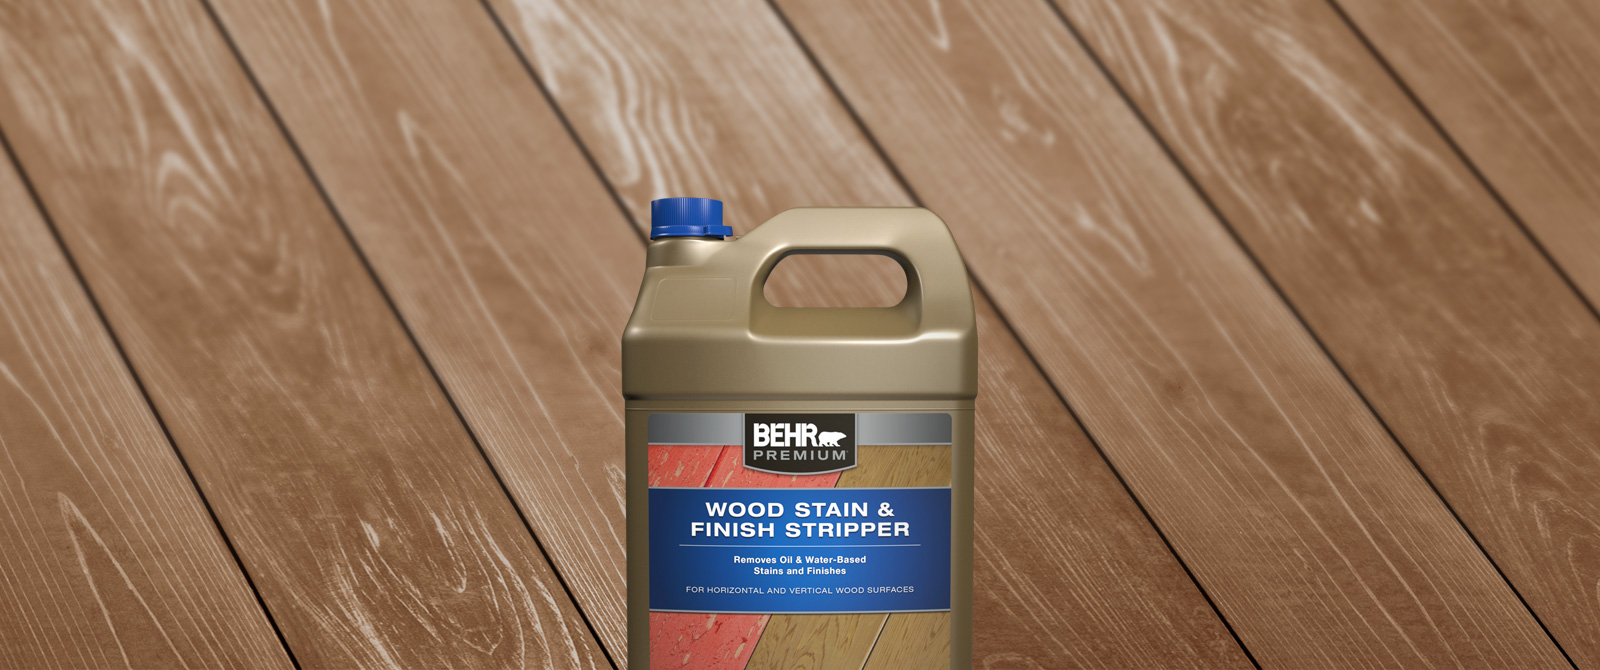 Image of BEHR PREMIUM Wood Stain & Finish Stripper product